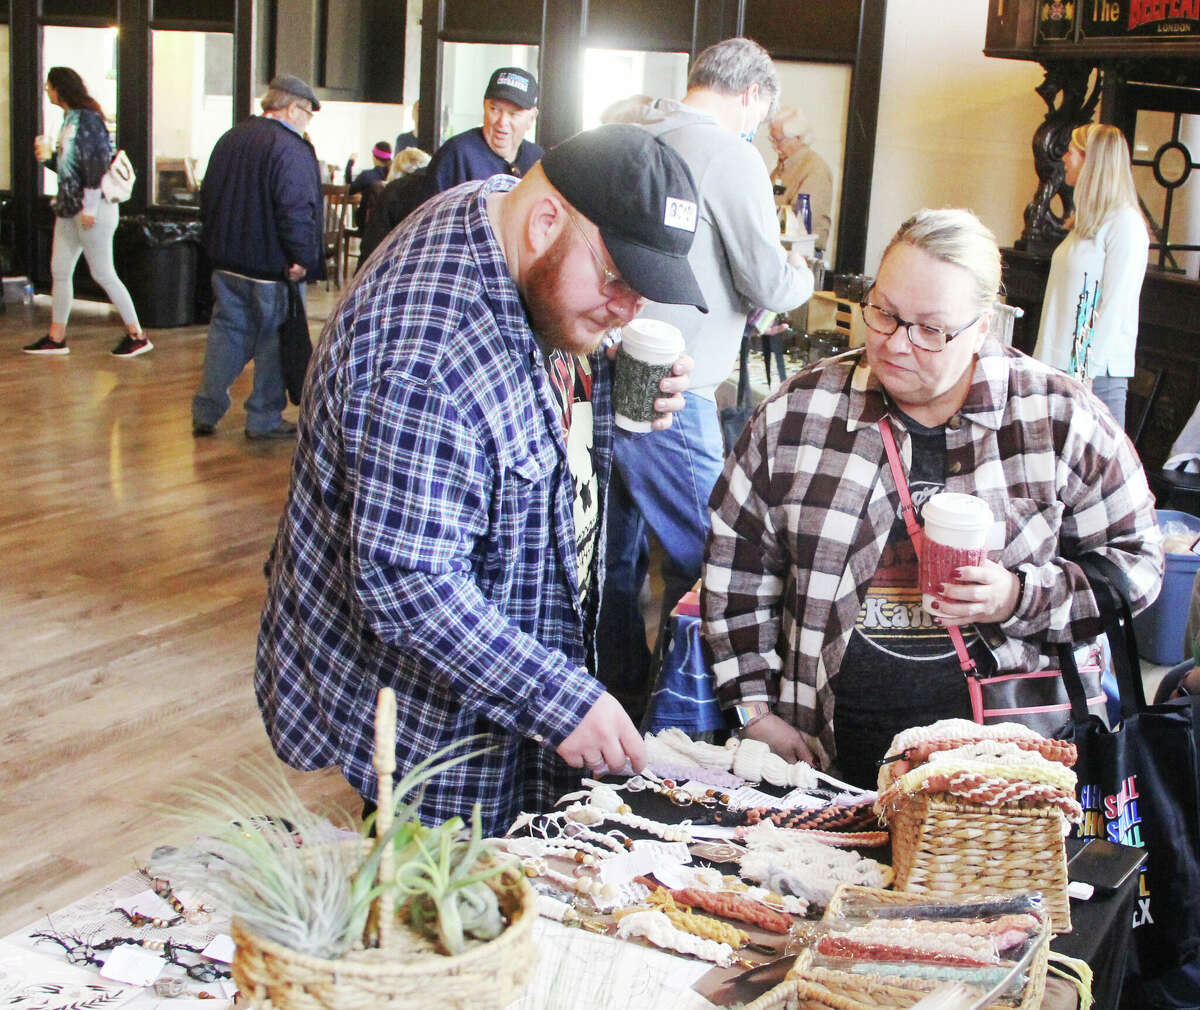 Wyatt Martin, of Kansas City, Missouri, and his mother, Toni Barbier, of Brighton, browse at the Post Commons during the annual Green Gift Bazaar, held Saturday at the Post Commons and Jacoby Arts Center. A joint effort by Alton Main Street and the Sierra Club for 20 years, the event offered environmentally friendly goods and is held in conjunction with Small Business Saturday.